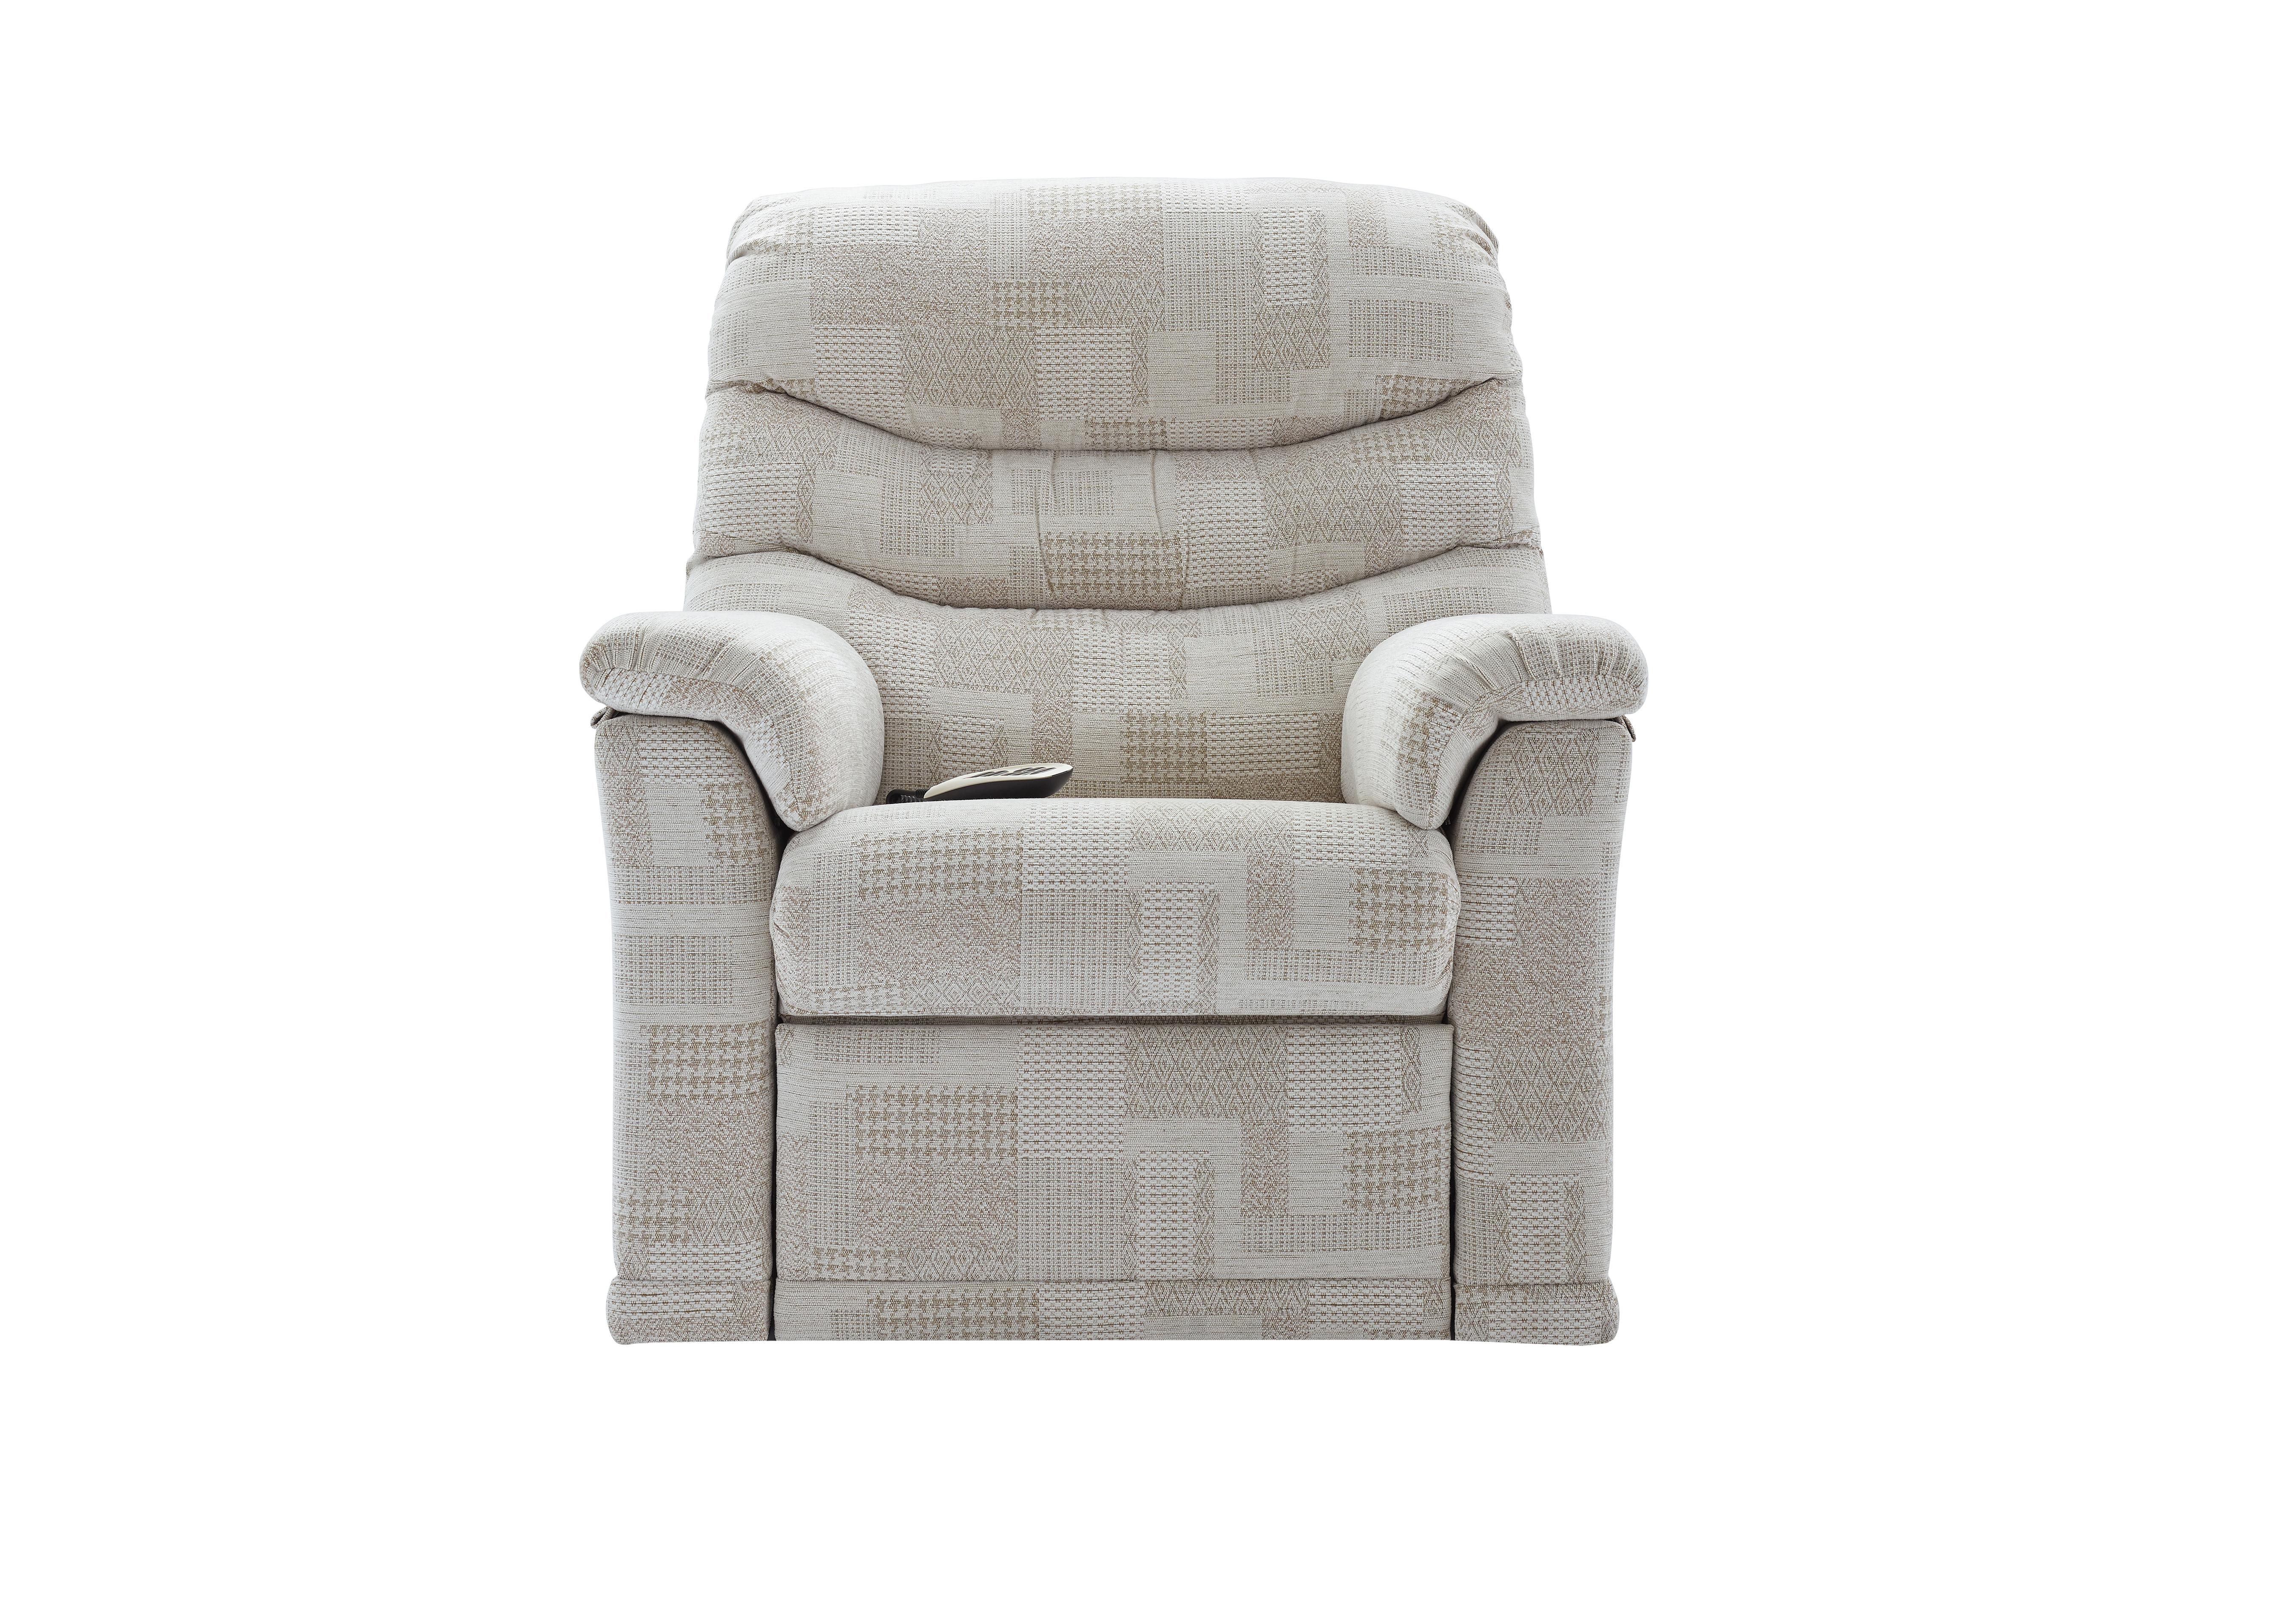 Malvern Fabric Rise and Recline Armchair in B342 Lydia Blush on Furniture Village